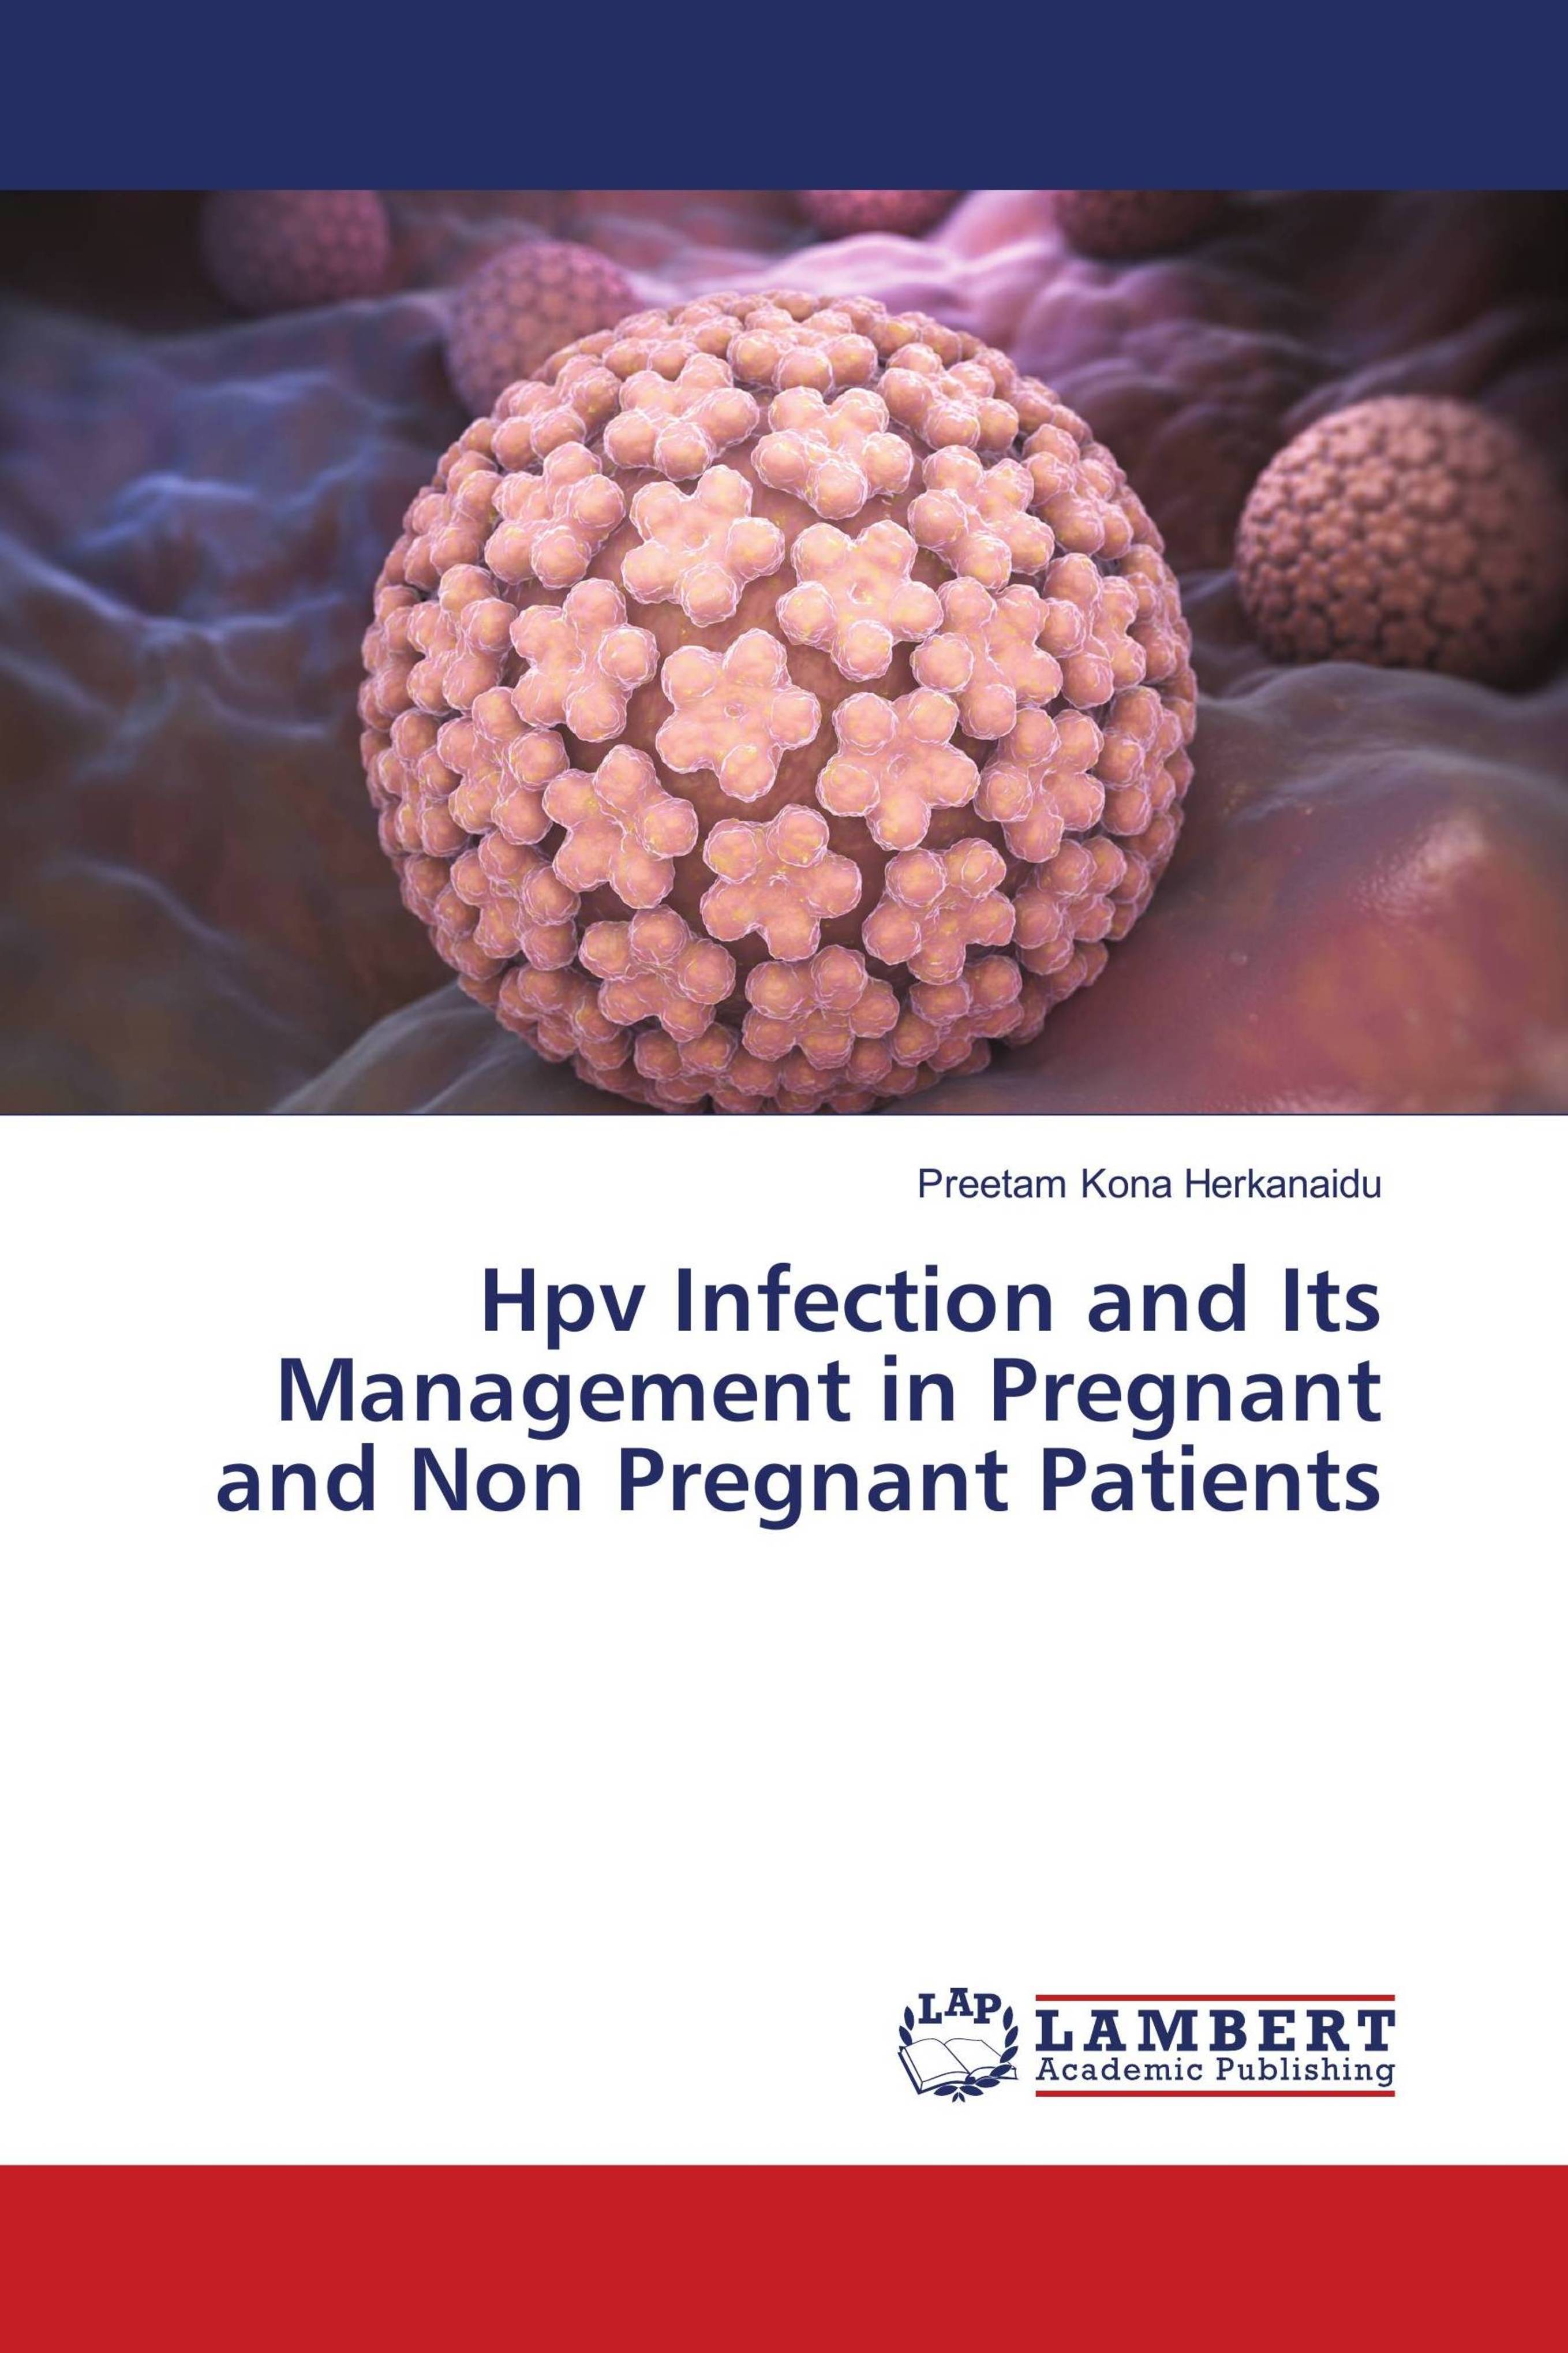 Hpv during pregnancy delivery